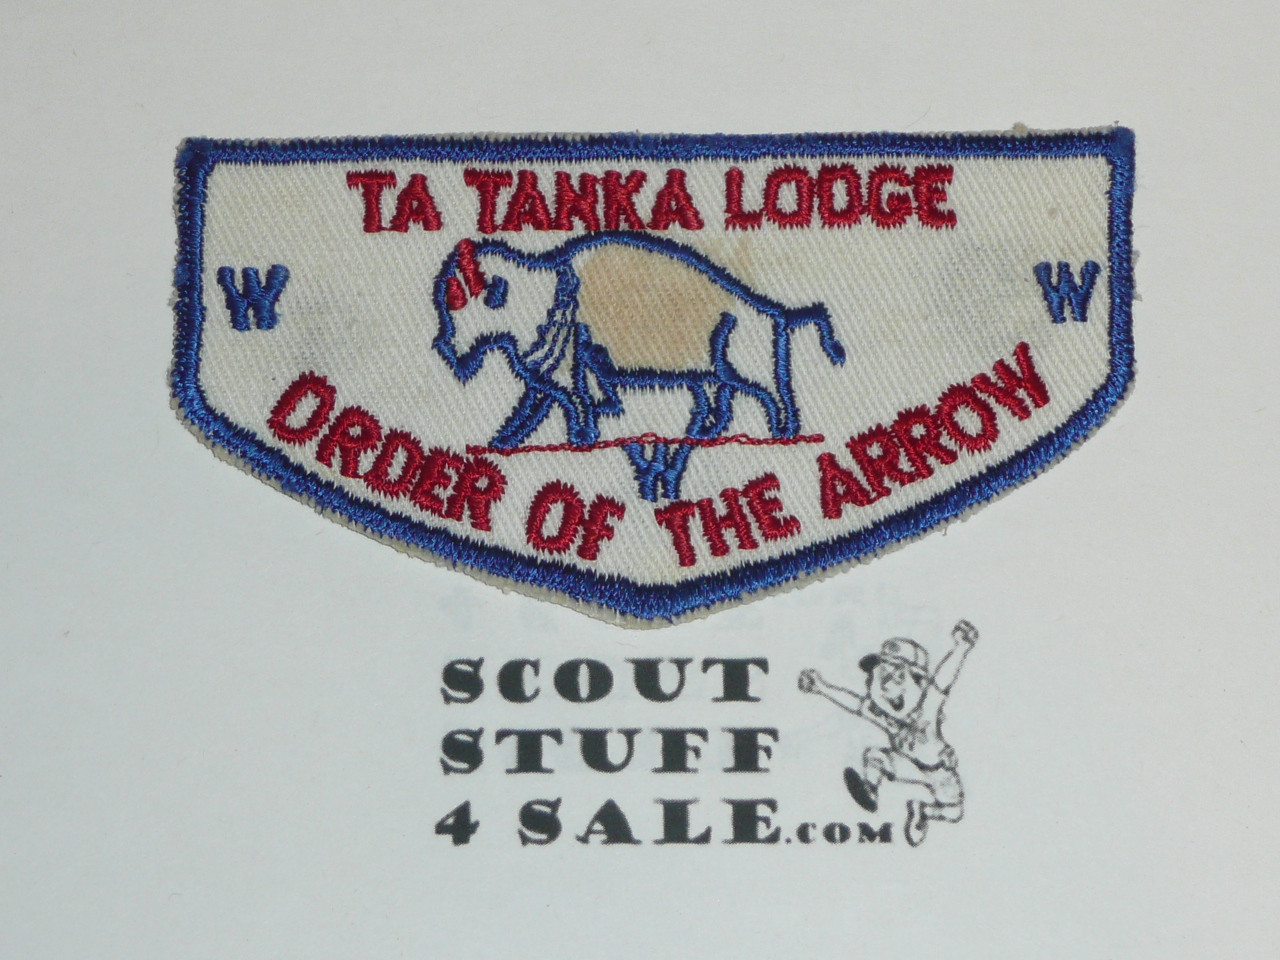 Order of the Arrow Lodge #488 Ta Tanka f1 First Flap Patch, glue/paper on back and some discoloration, unused